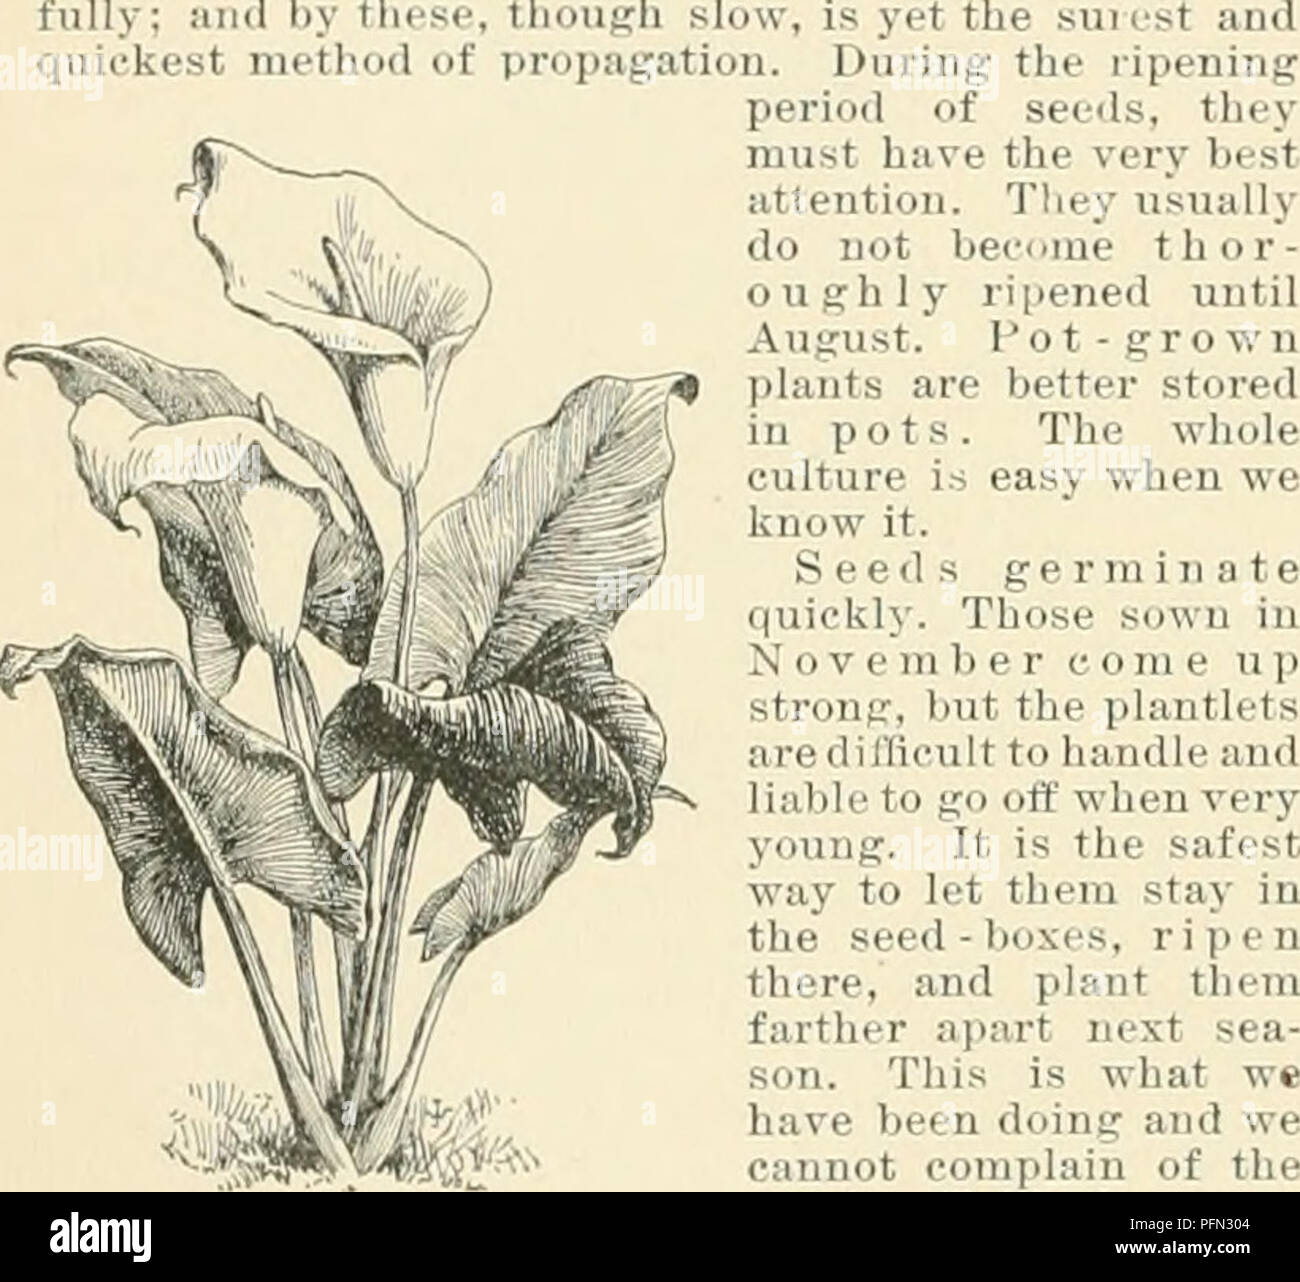 . Cyclopedia of American horticulture, comprising suggestions for cultivation of horticultural plants, descriptions of the species of fruits, vegetables, flowers, and ornamental plants sold in the United States and Canada, together with geographical and biographical sketches. Gardening. yab BICHARDIA thereaboutsâand aboutasbigasmarbles. Mr. Tailby seen i RICINUS pot-plant either in tlie dwelling or on sale at lii-s. hi tlic most favored places only is it en- iri fi-&lt;'!ji *]^- frf'st, though the damage to it from 1 ' ' ' ii&lt;.us in or around Los Angeles. : : i ..'II in the full sun, our su Stock Photo